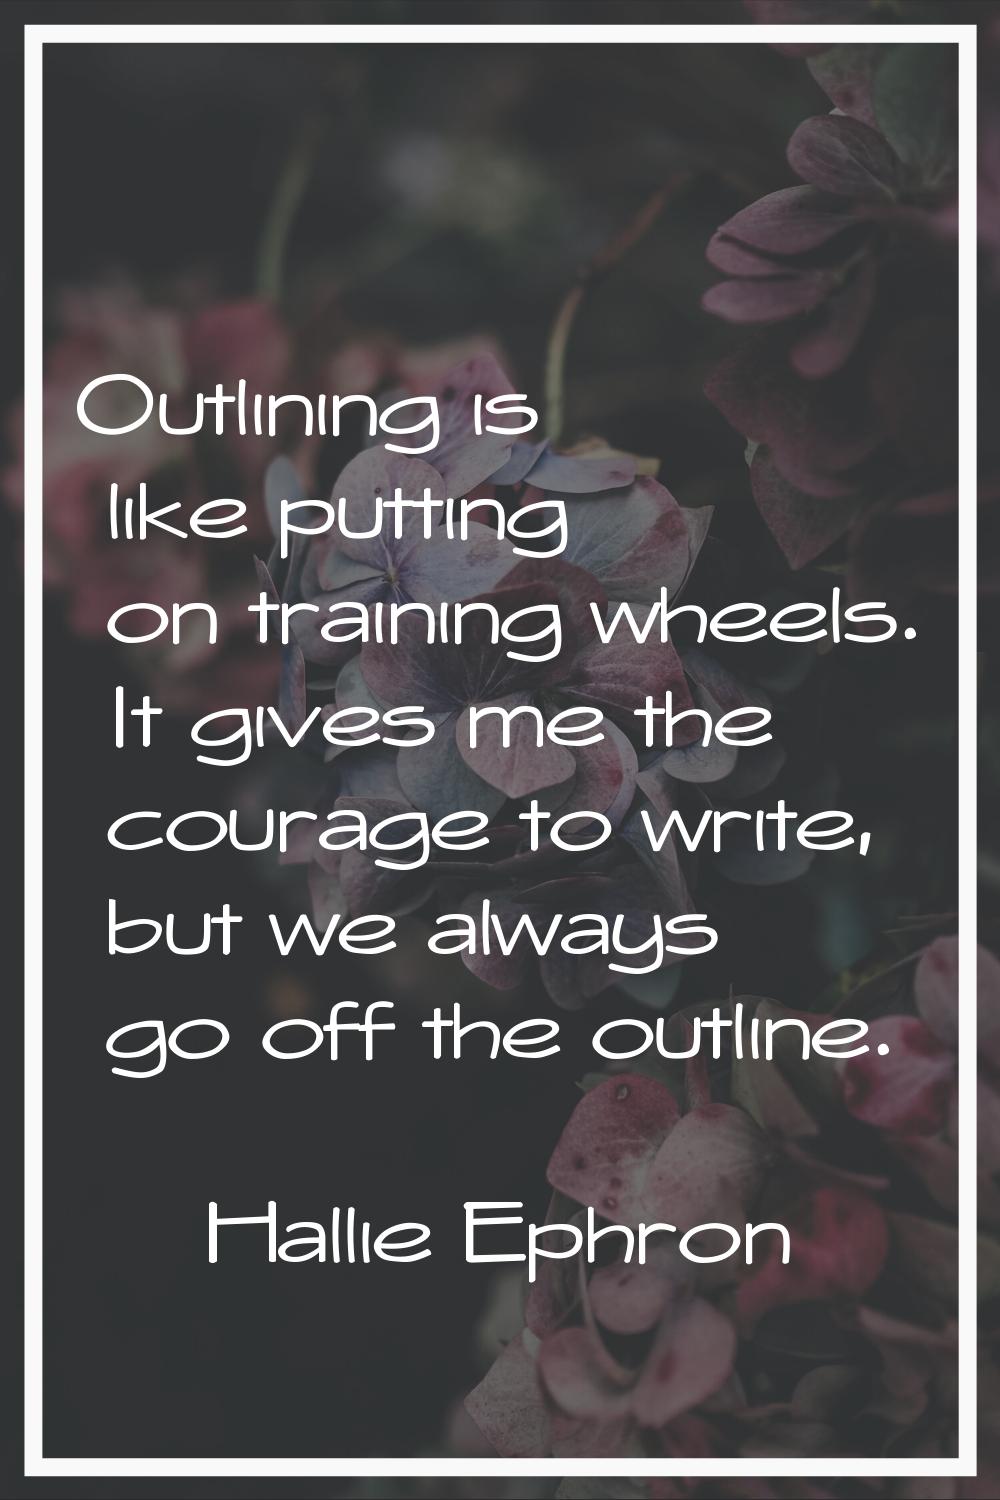 Outlining is like putting on training wheels. It gives me the courage to write, but we always go of